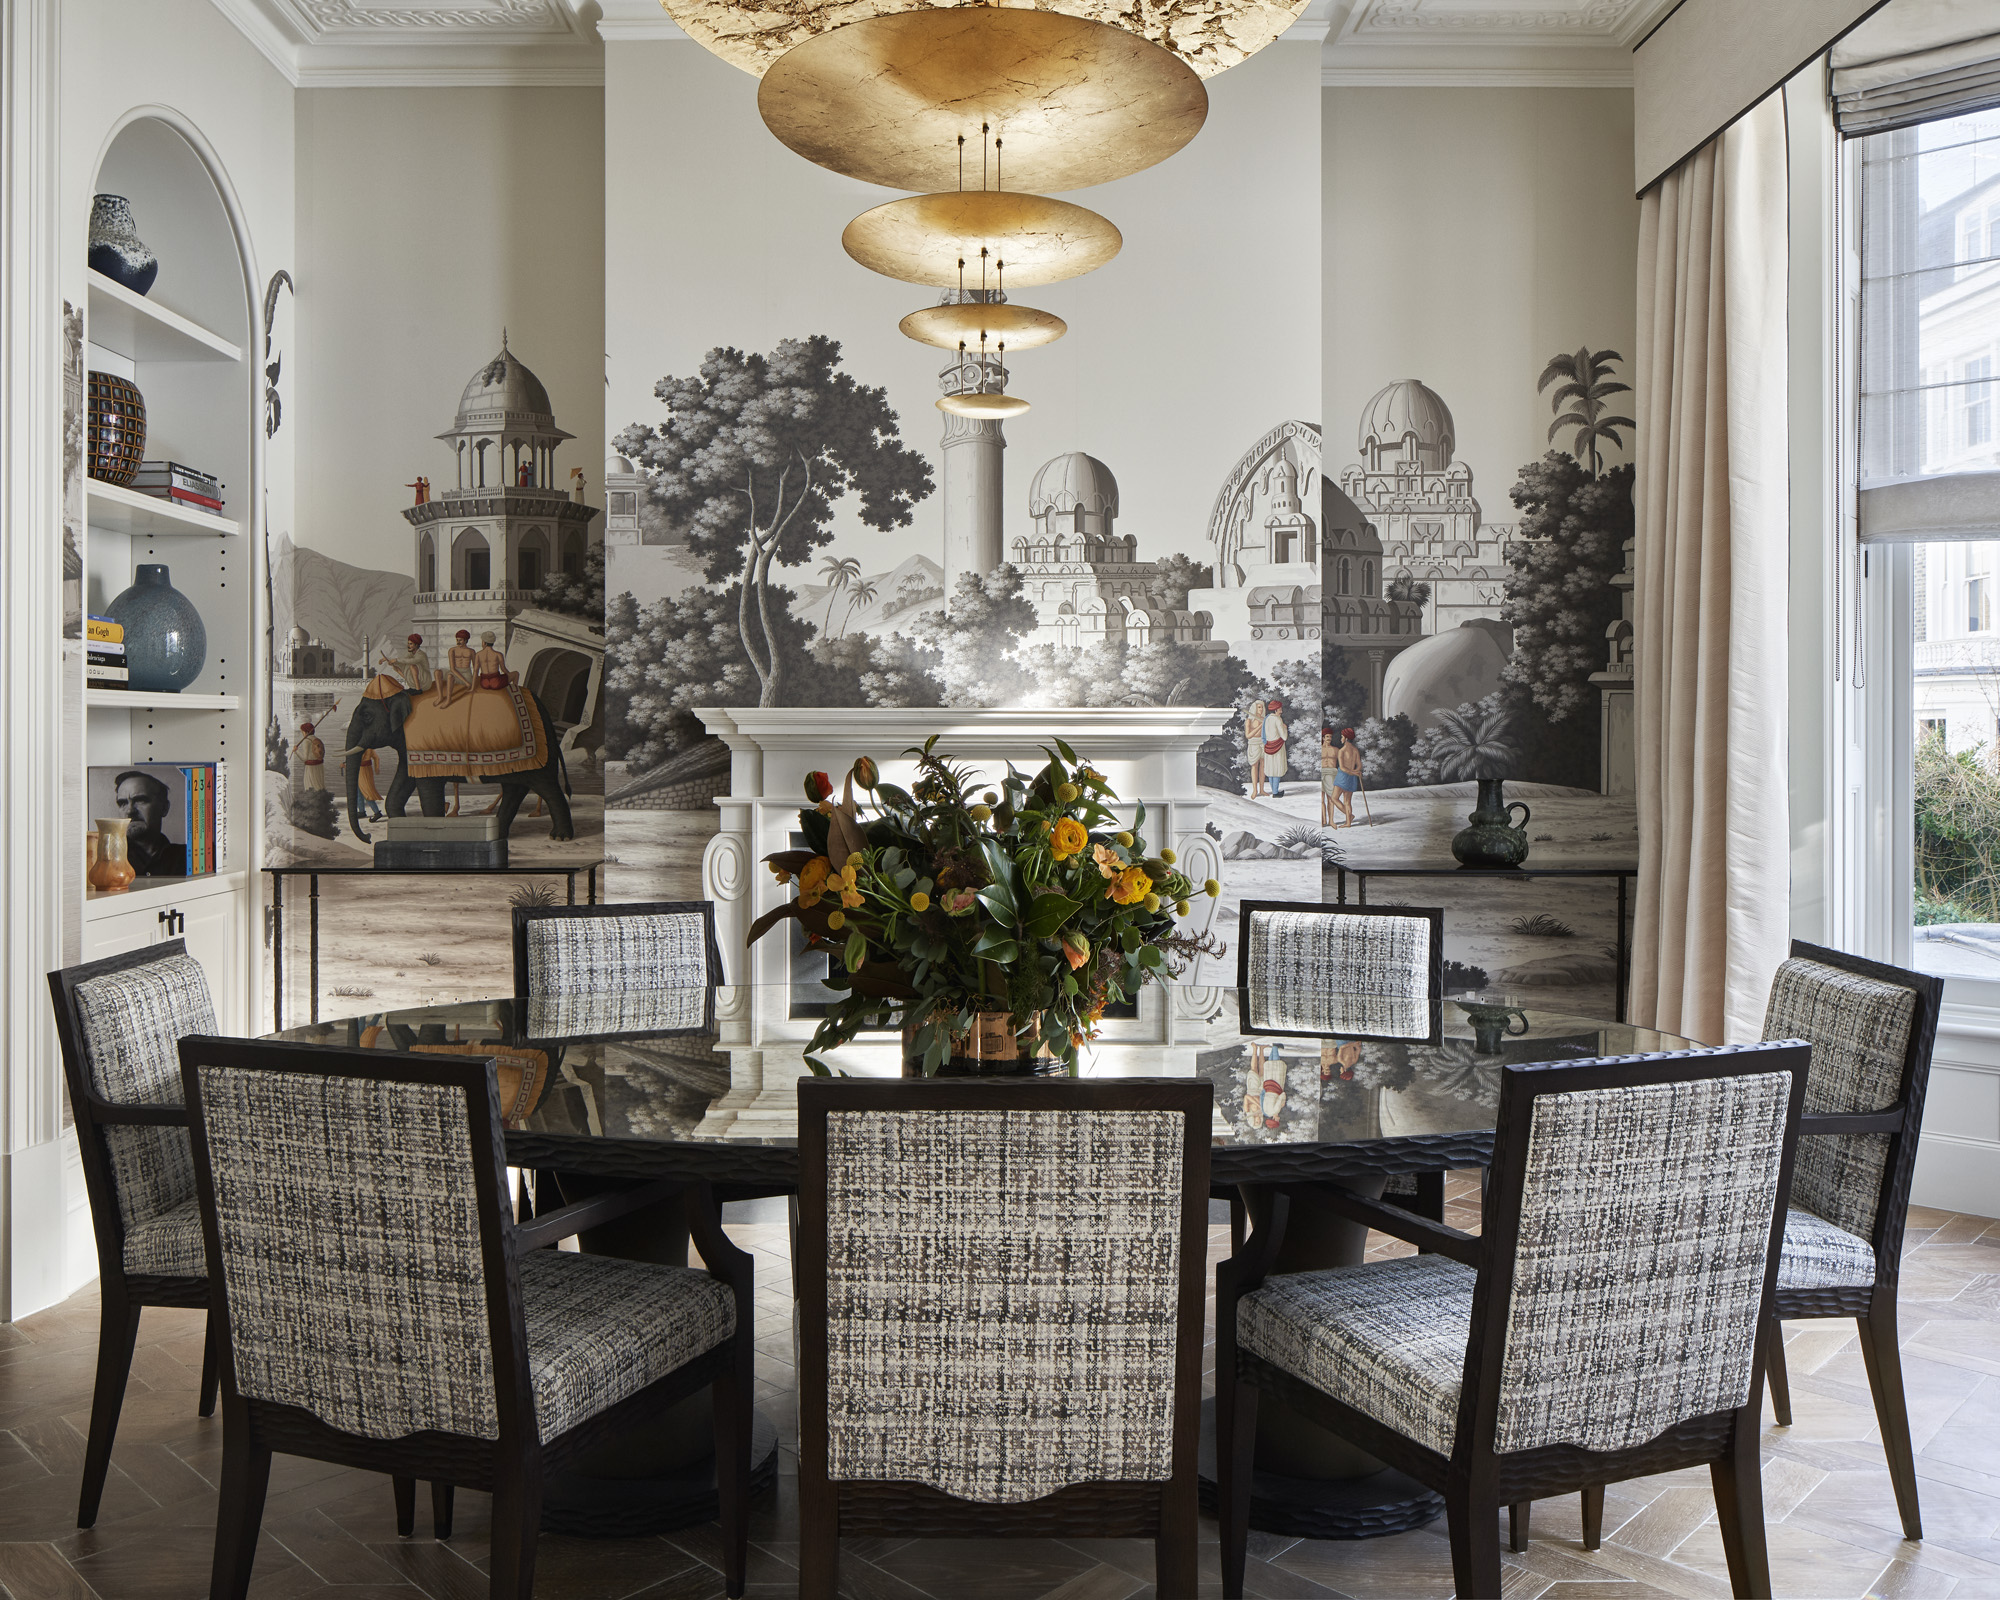 A dining table decor idea with round dark wood table, brass chandelier in a modern style, grey mural wallpaper and a floral centerpiece